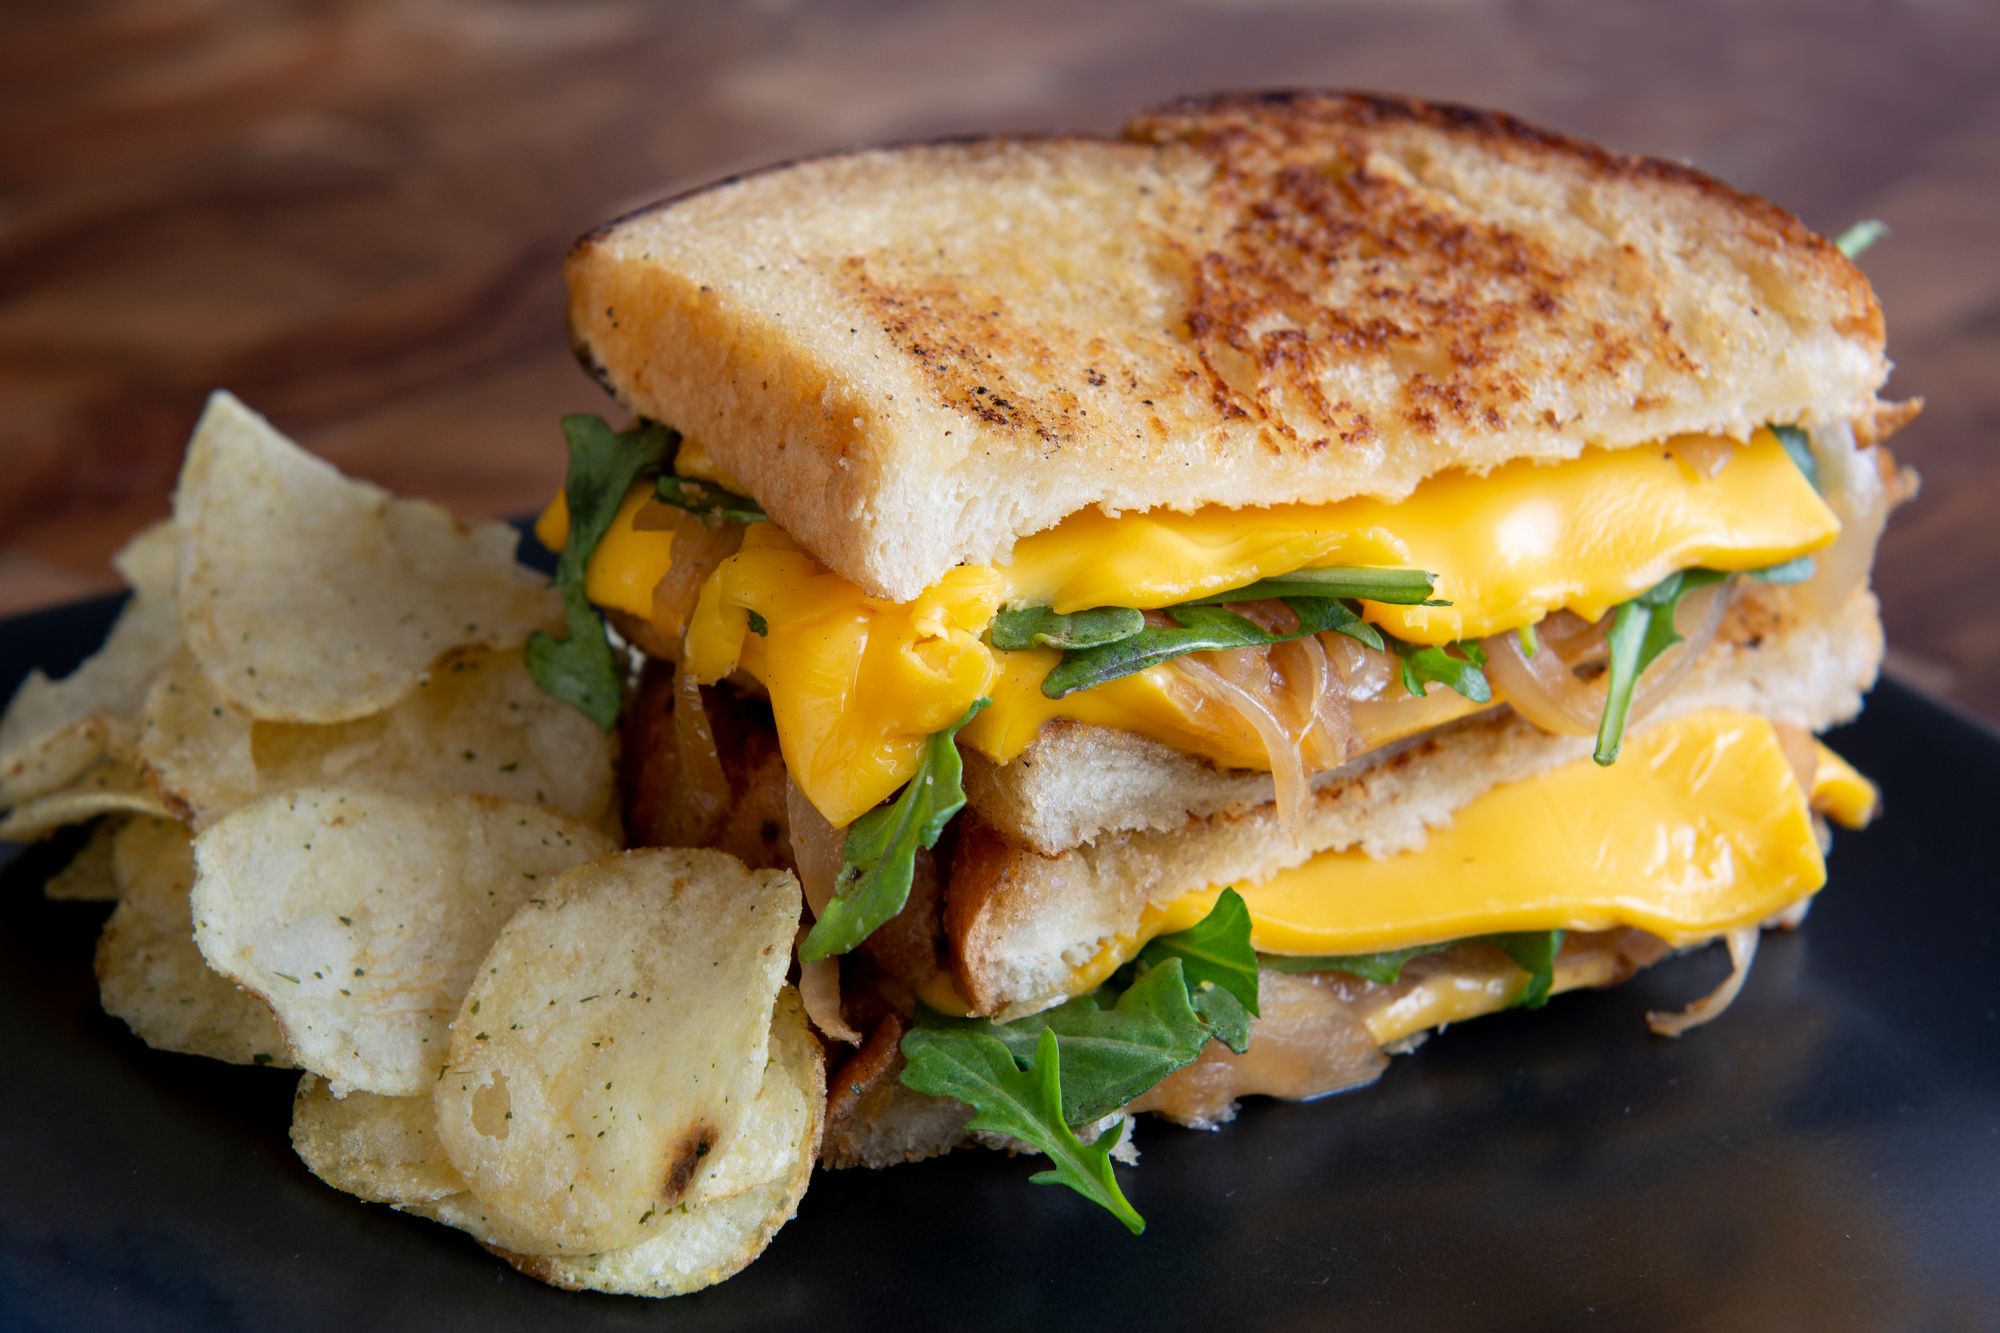 Grilled Cheese with Gouda, Arugula & Caramelized Onions